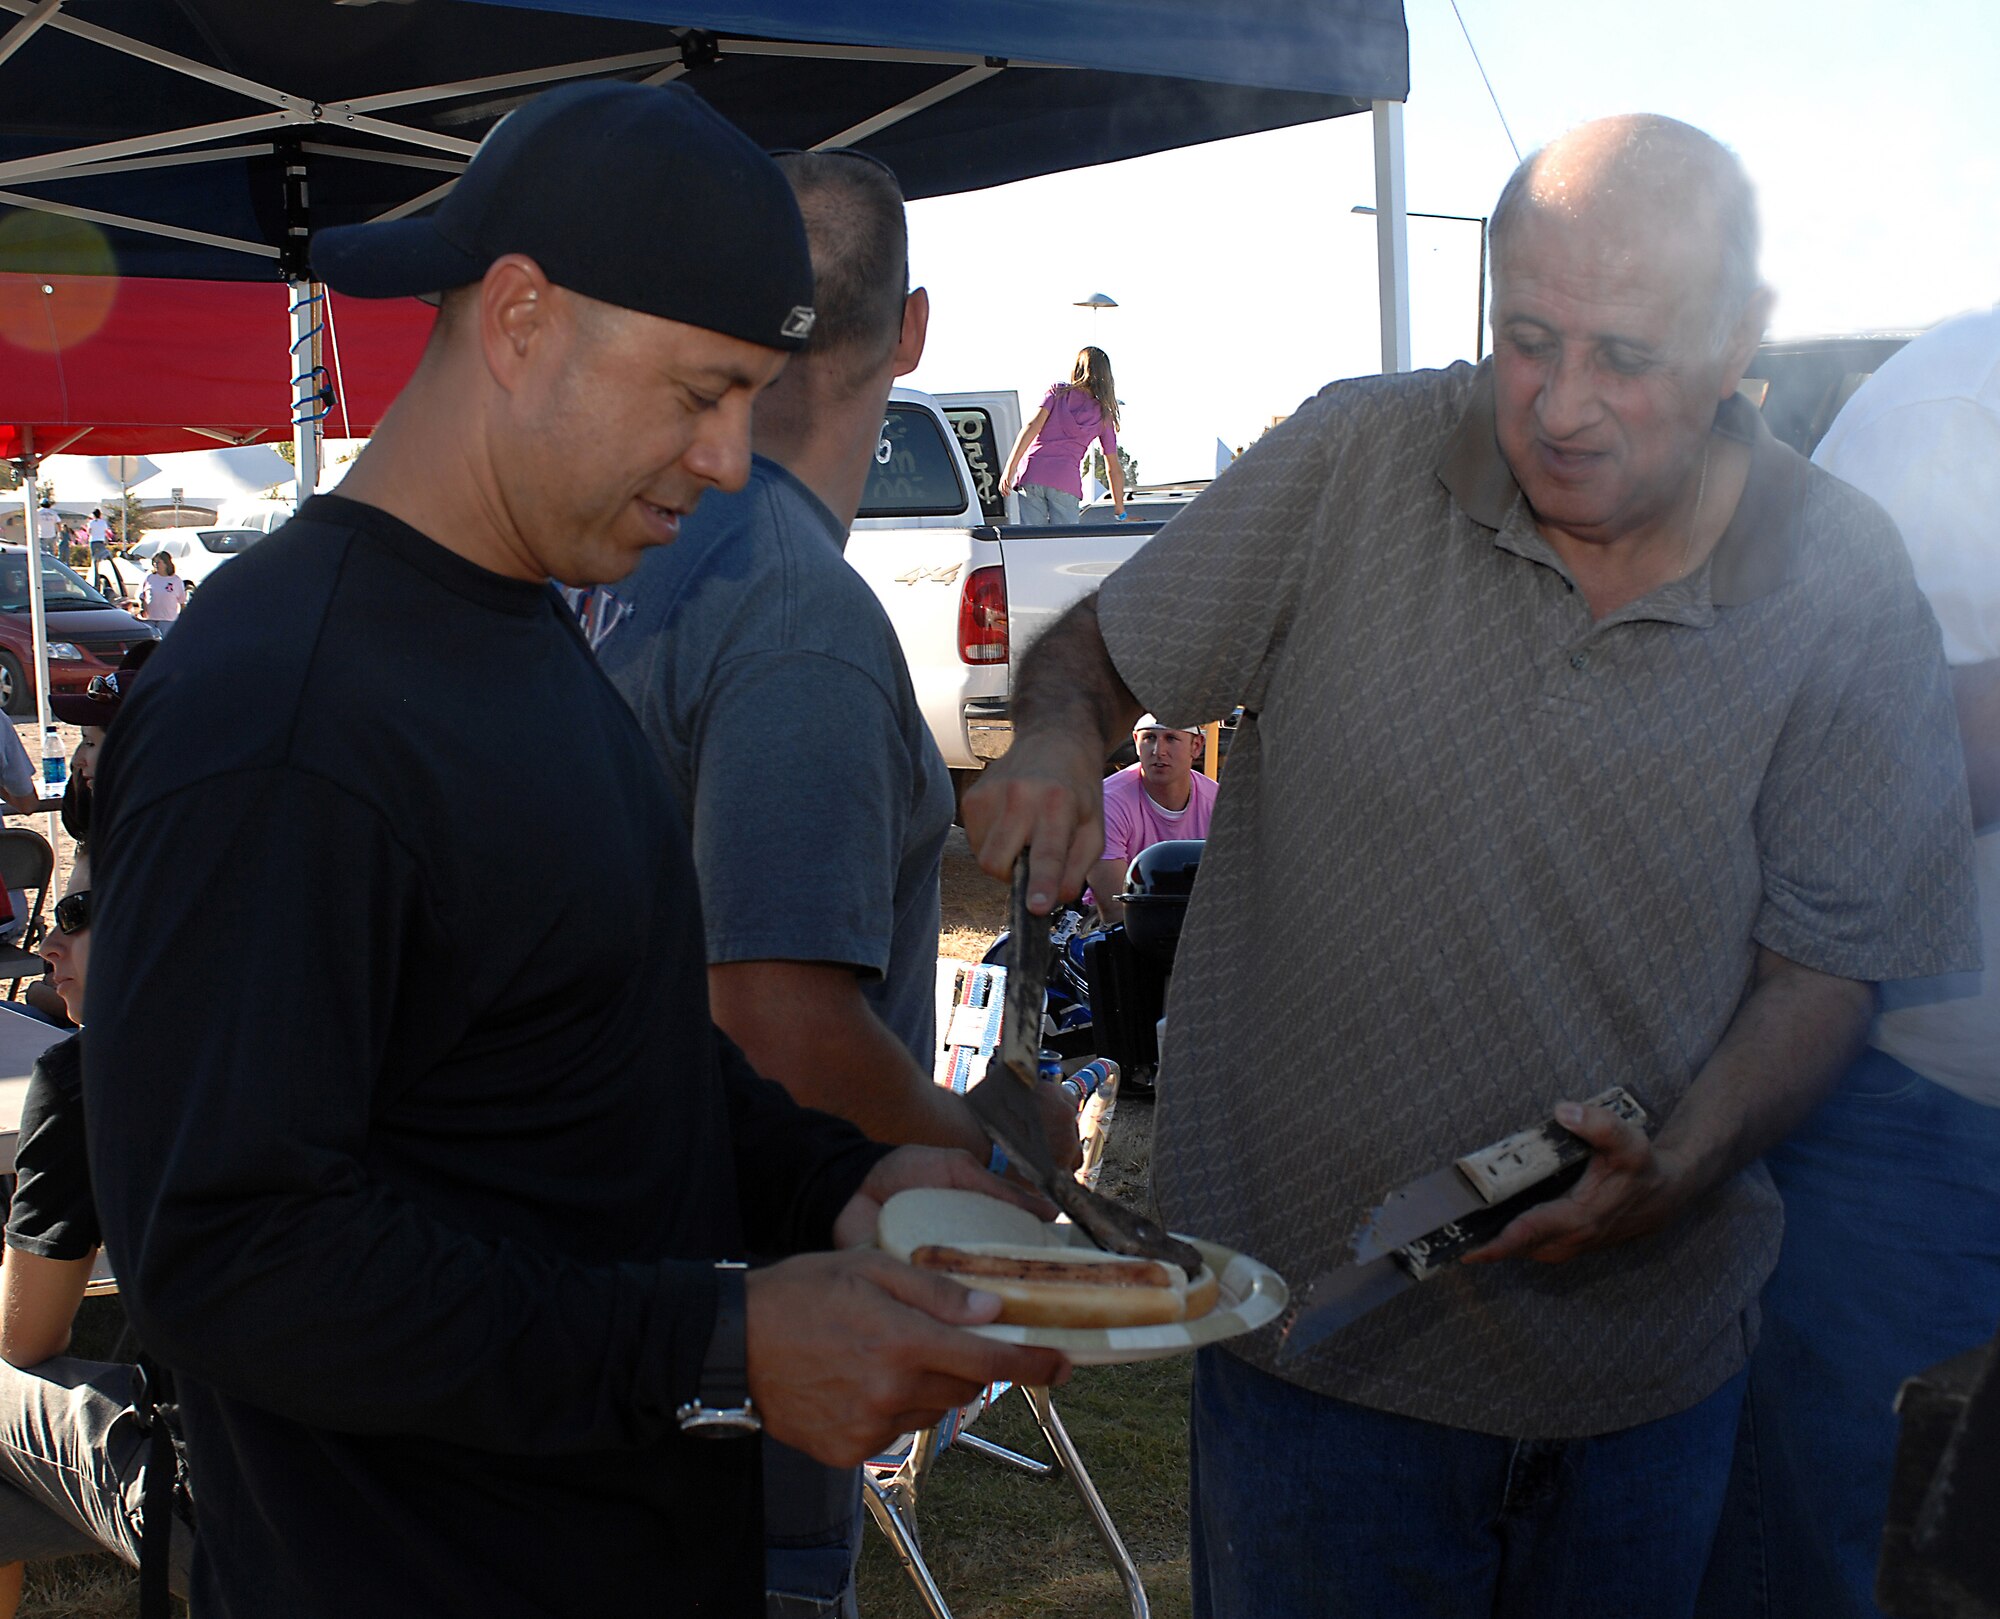 Juan Mejia, 49th Operations Group secretary, serves a burger to Chief Master Sgt. Jeffery Cui, 49th Fighter Wing command chief, during the tailgate party hosted by the 49 OG from Holloman Air Force Base, N.M., before the New Mexico State University game against San Jose State at NMSU, October 18. More than 80 Team Holloman Airmen, family and friends attended the party. (U.S. Air Force photo illustration/Airman Sondra M. Escutia)